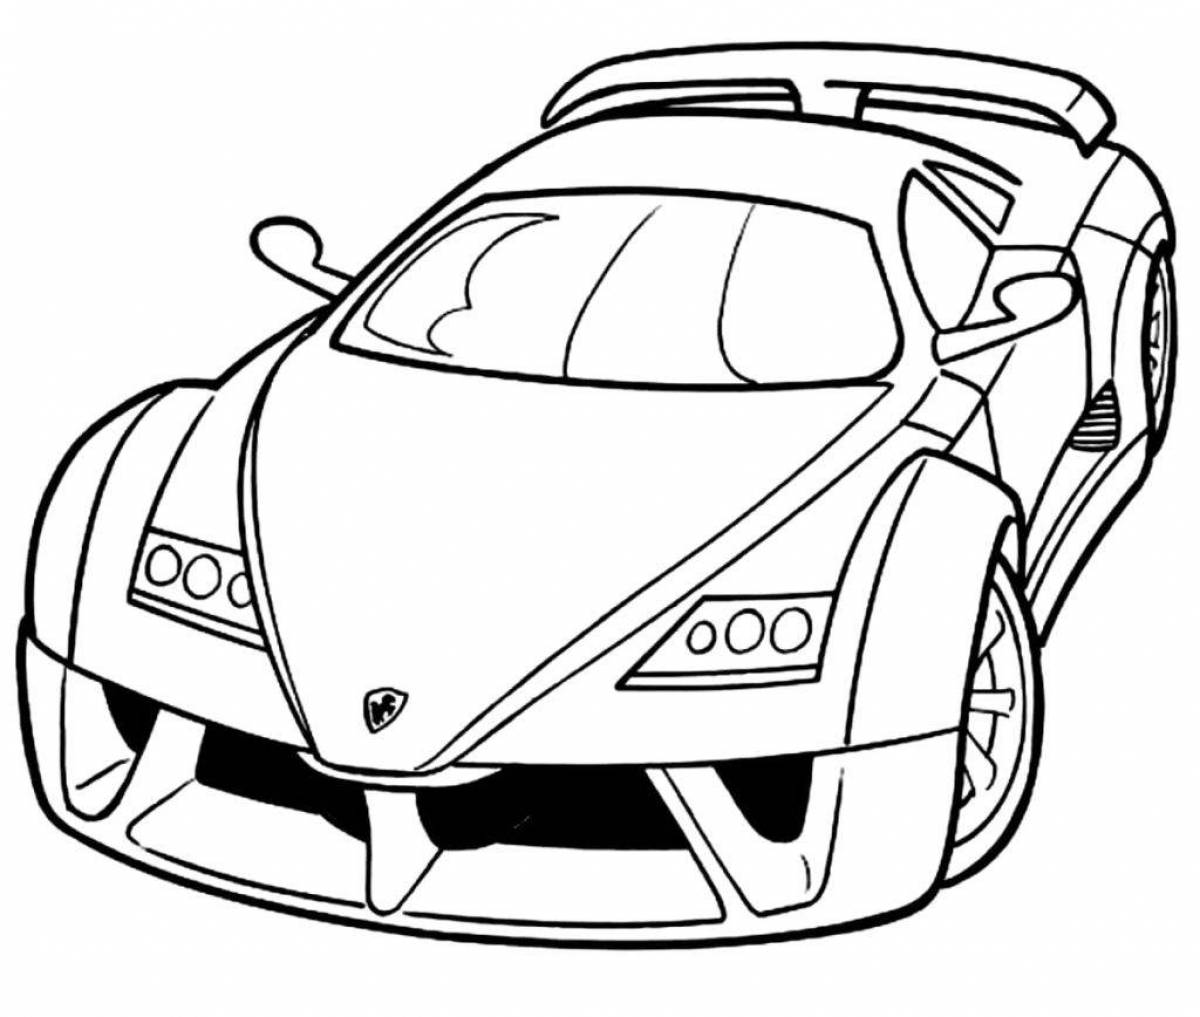 Coloring page shiny sports car